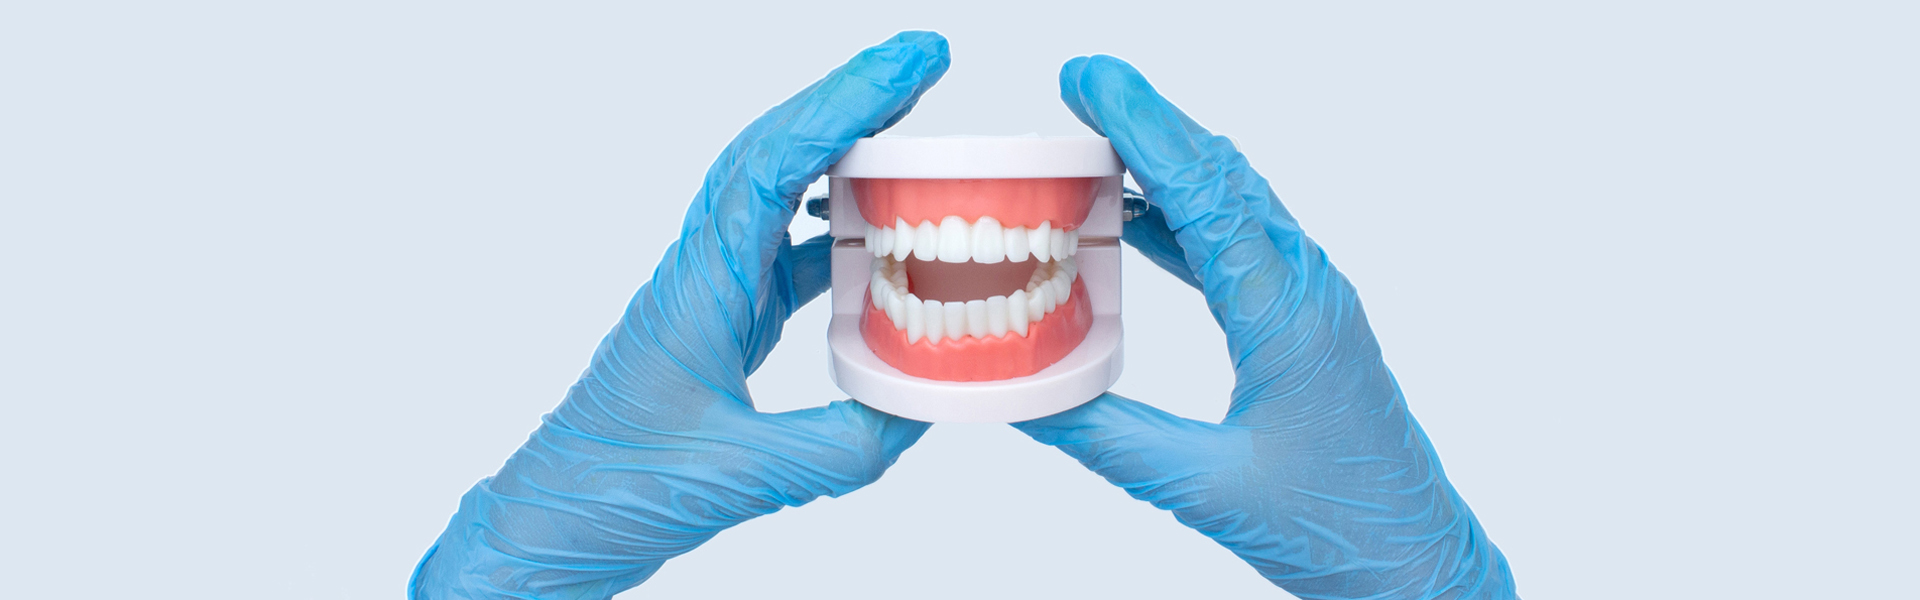 Denture Cleaning 101: Best Practices for Oral Health